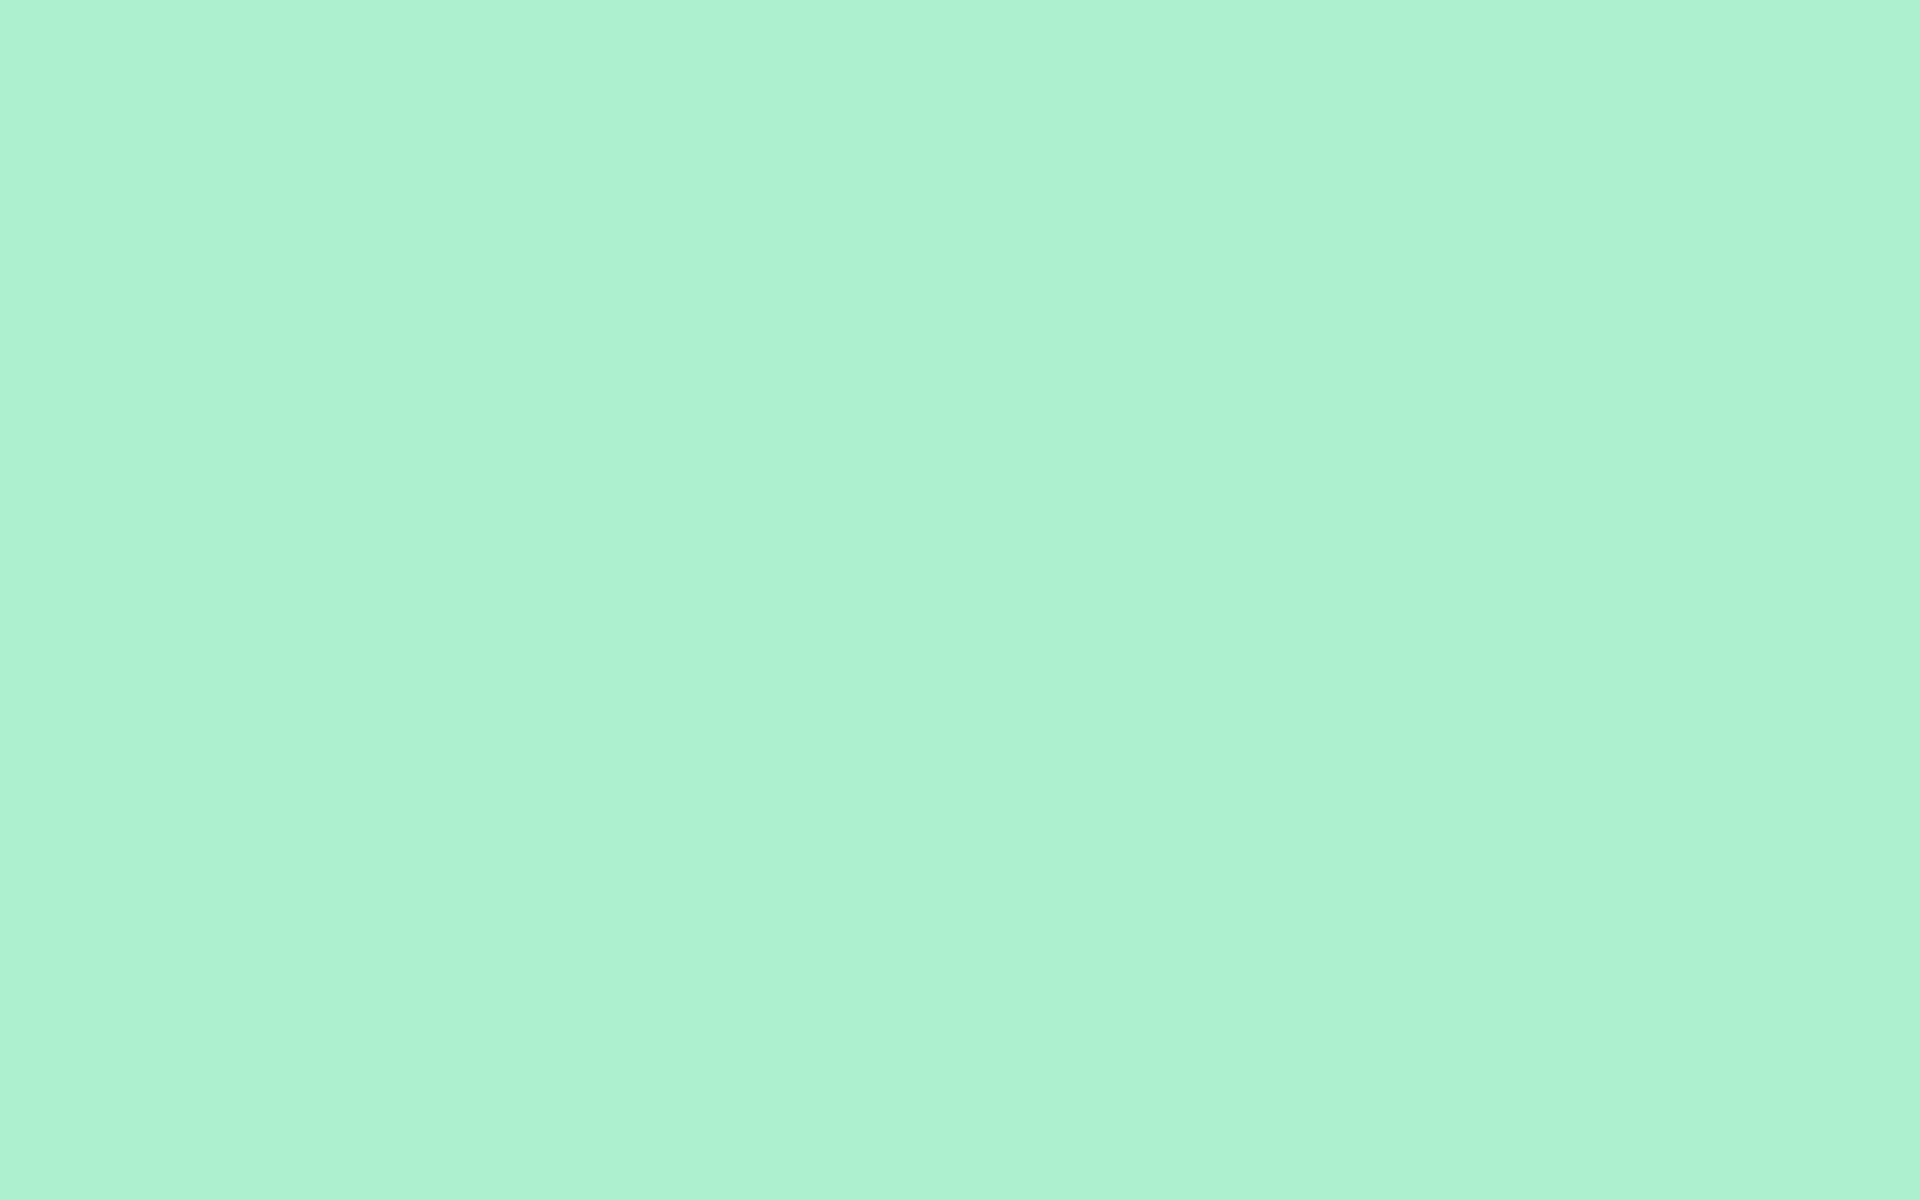 Solid Mint Green Background Image Pictures Becuo